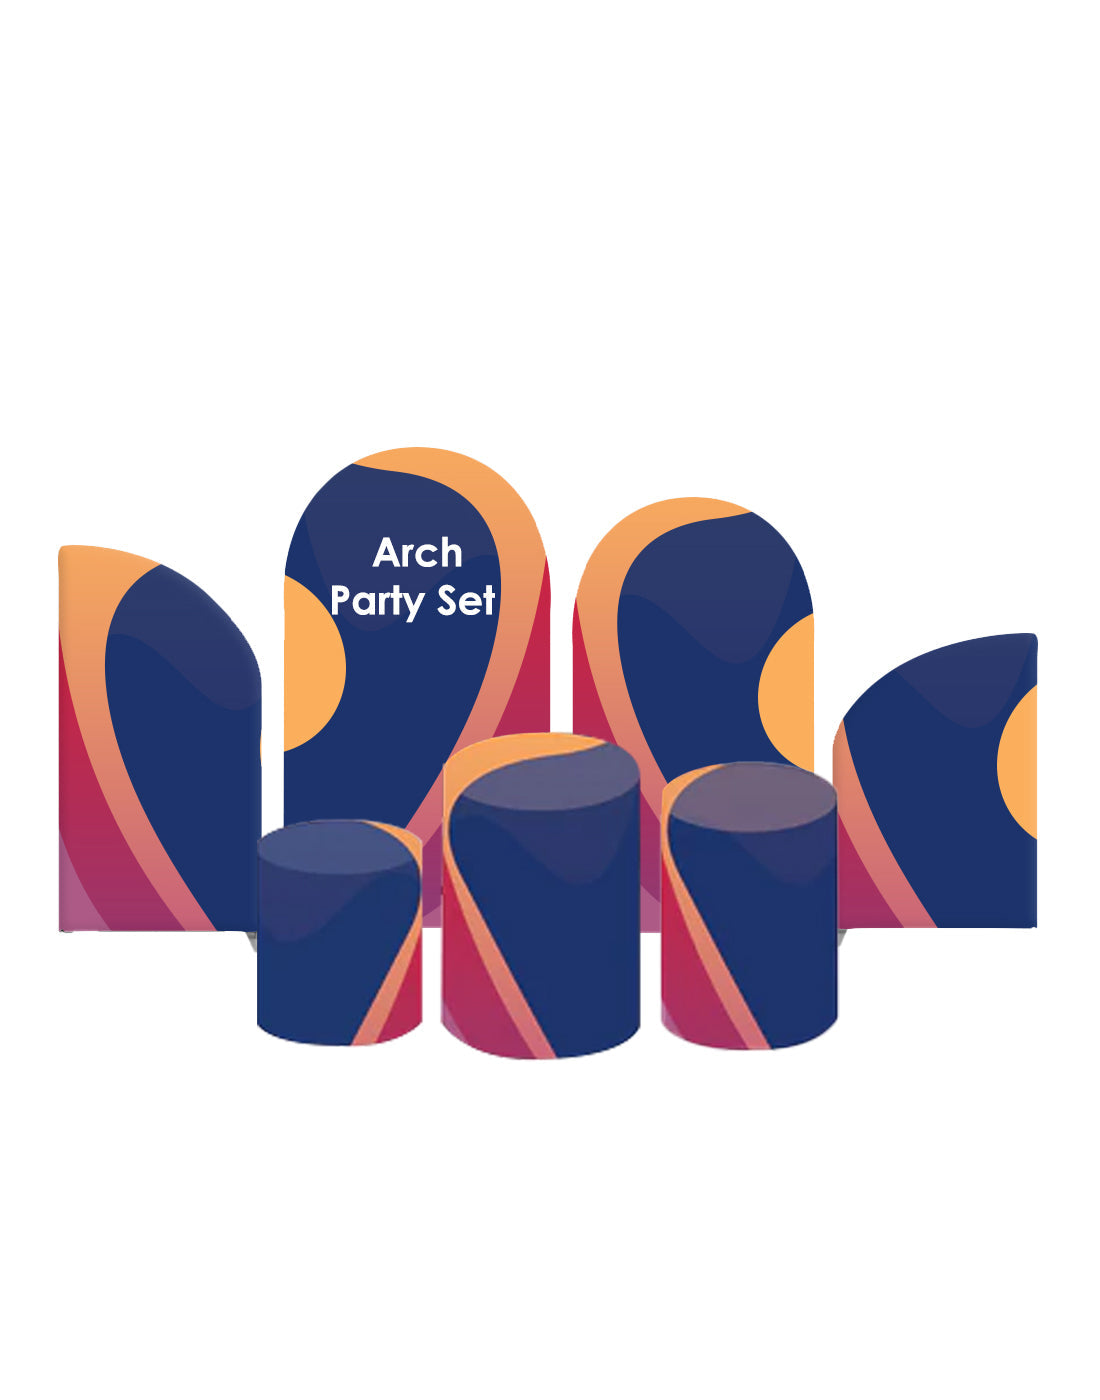 Arch Party Sets - 4 Walls with Plinth